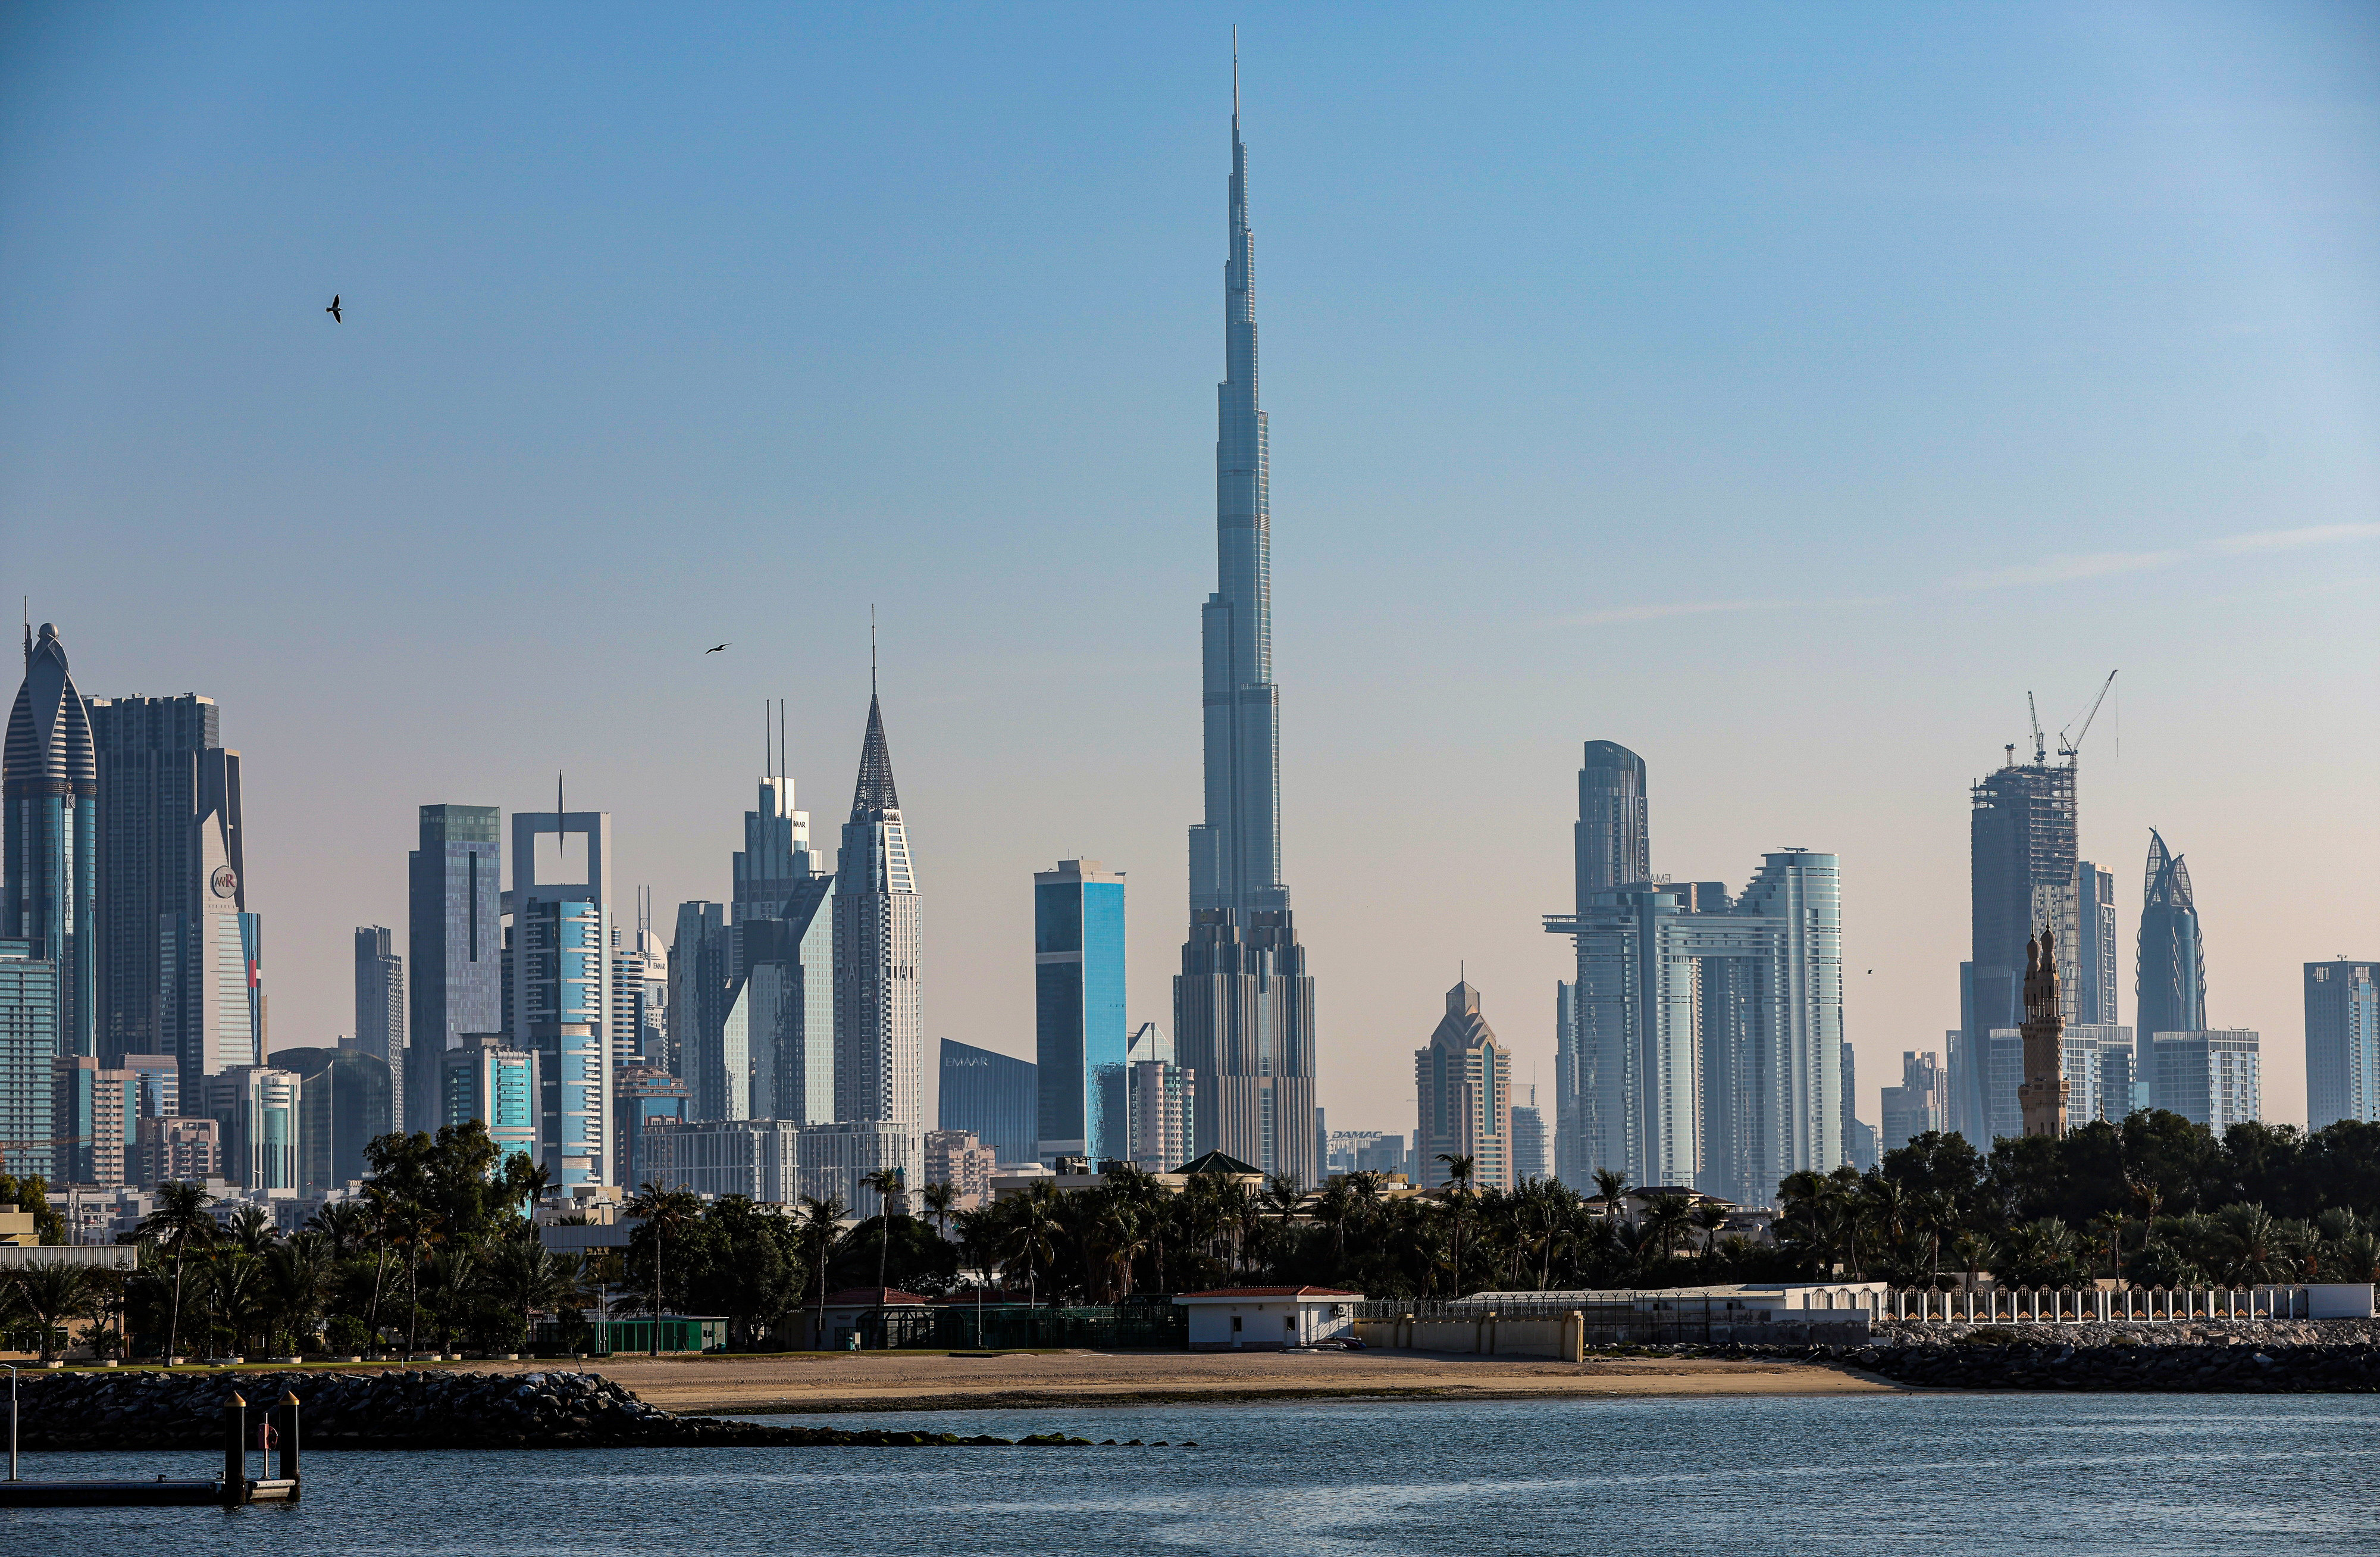 Hong Kong virtual insurer OneDegree is expanding its offerings to the UAE via a partnership. Pictured is Dubai, with the Burj Khalifa at its centre. Photo: EPA-EFE